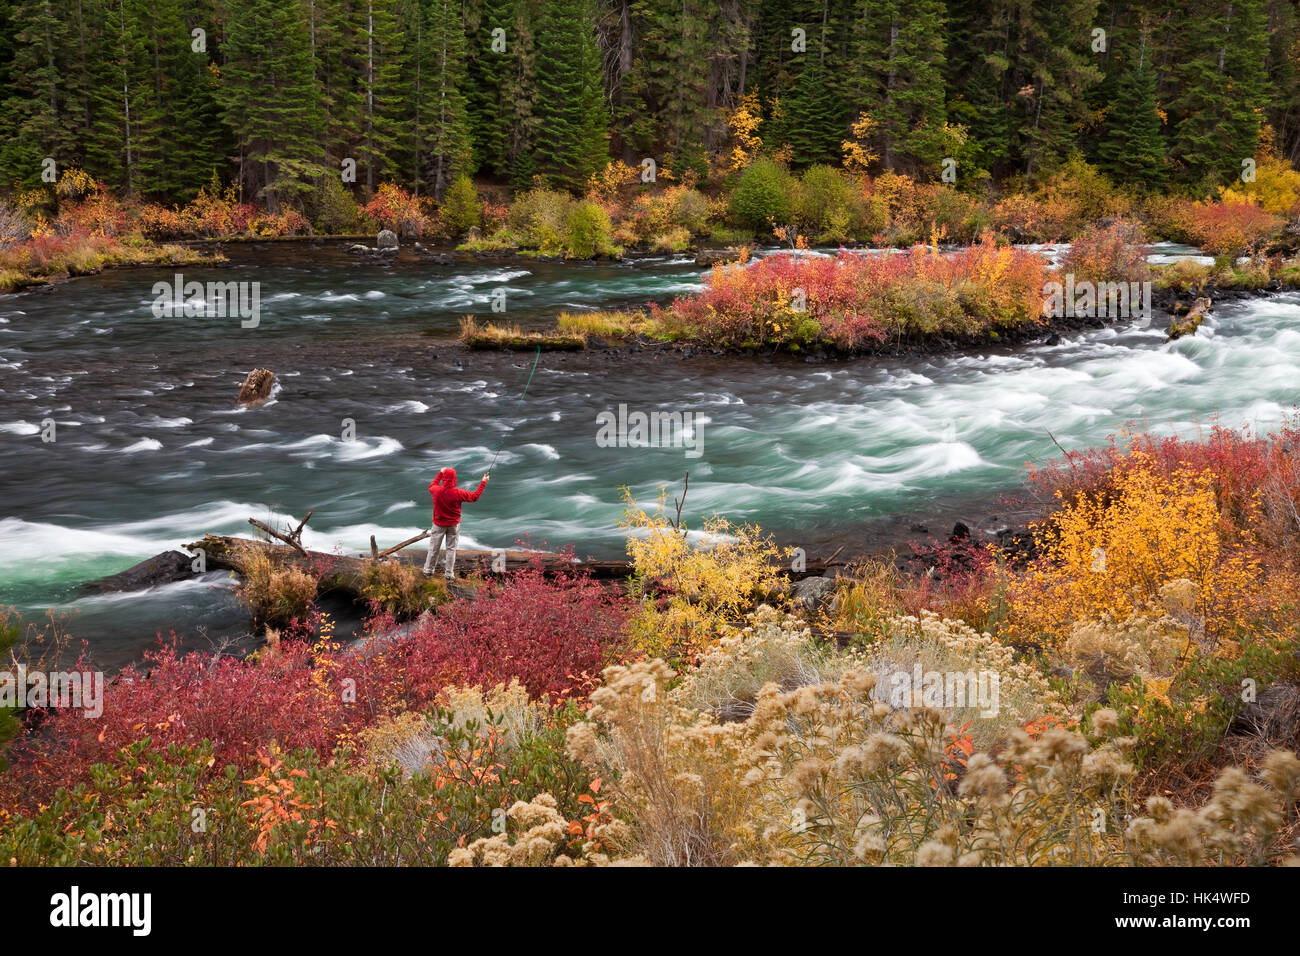 Autumn Fly fishing on the Deschutes River Outside Bend Oregon Stock Photo